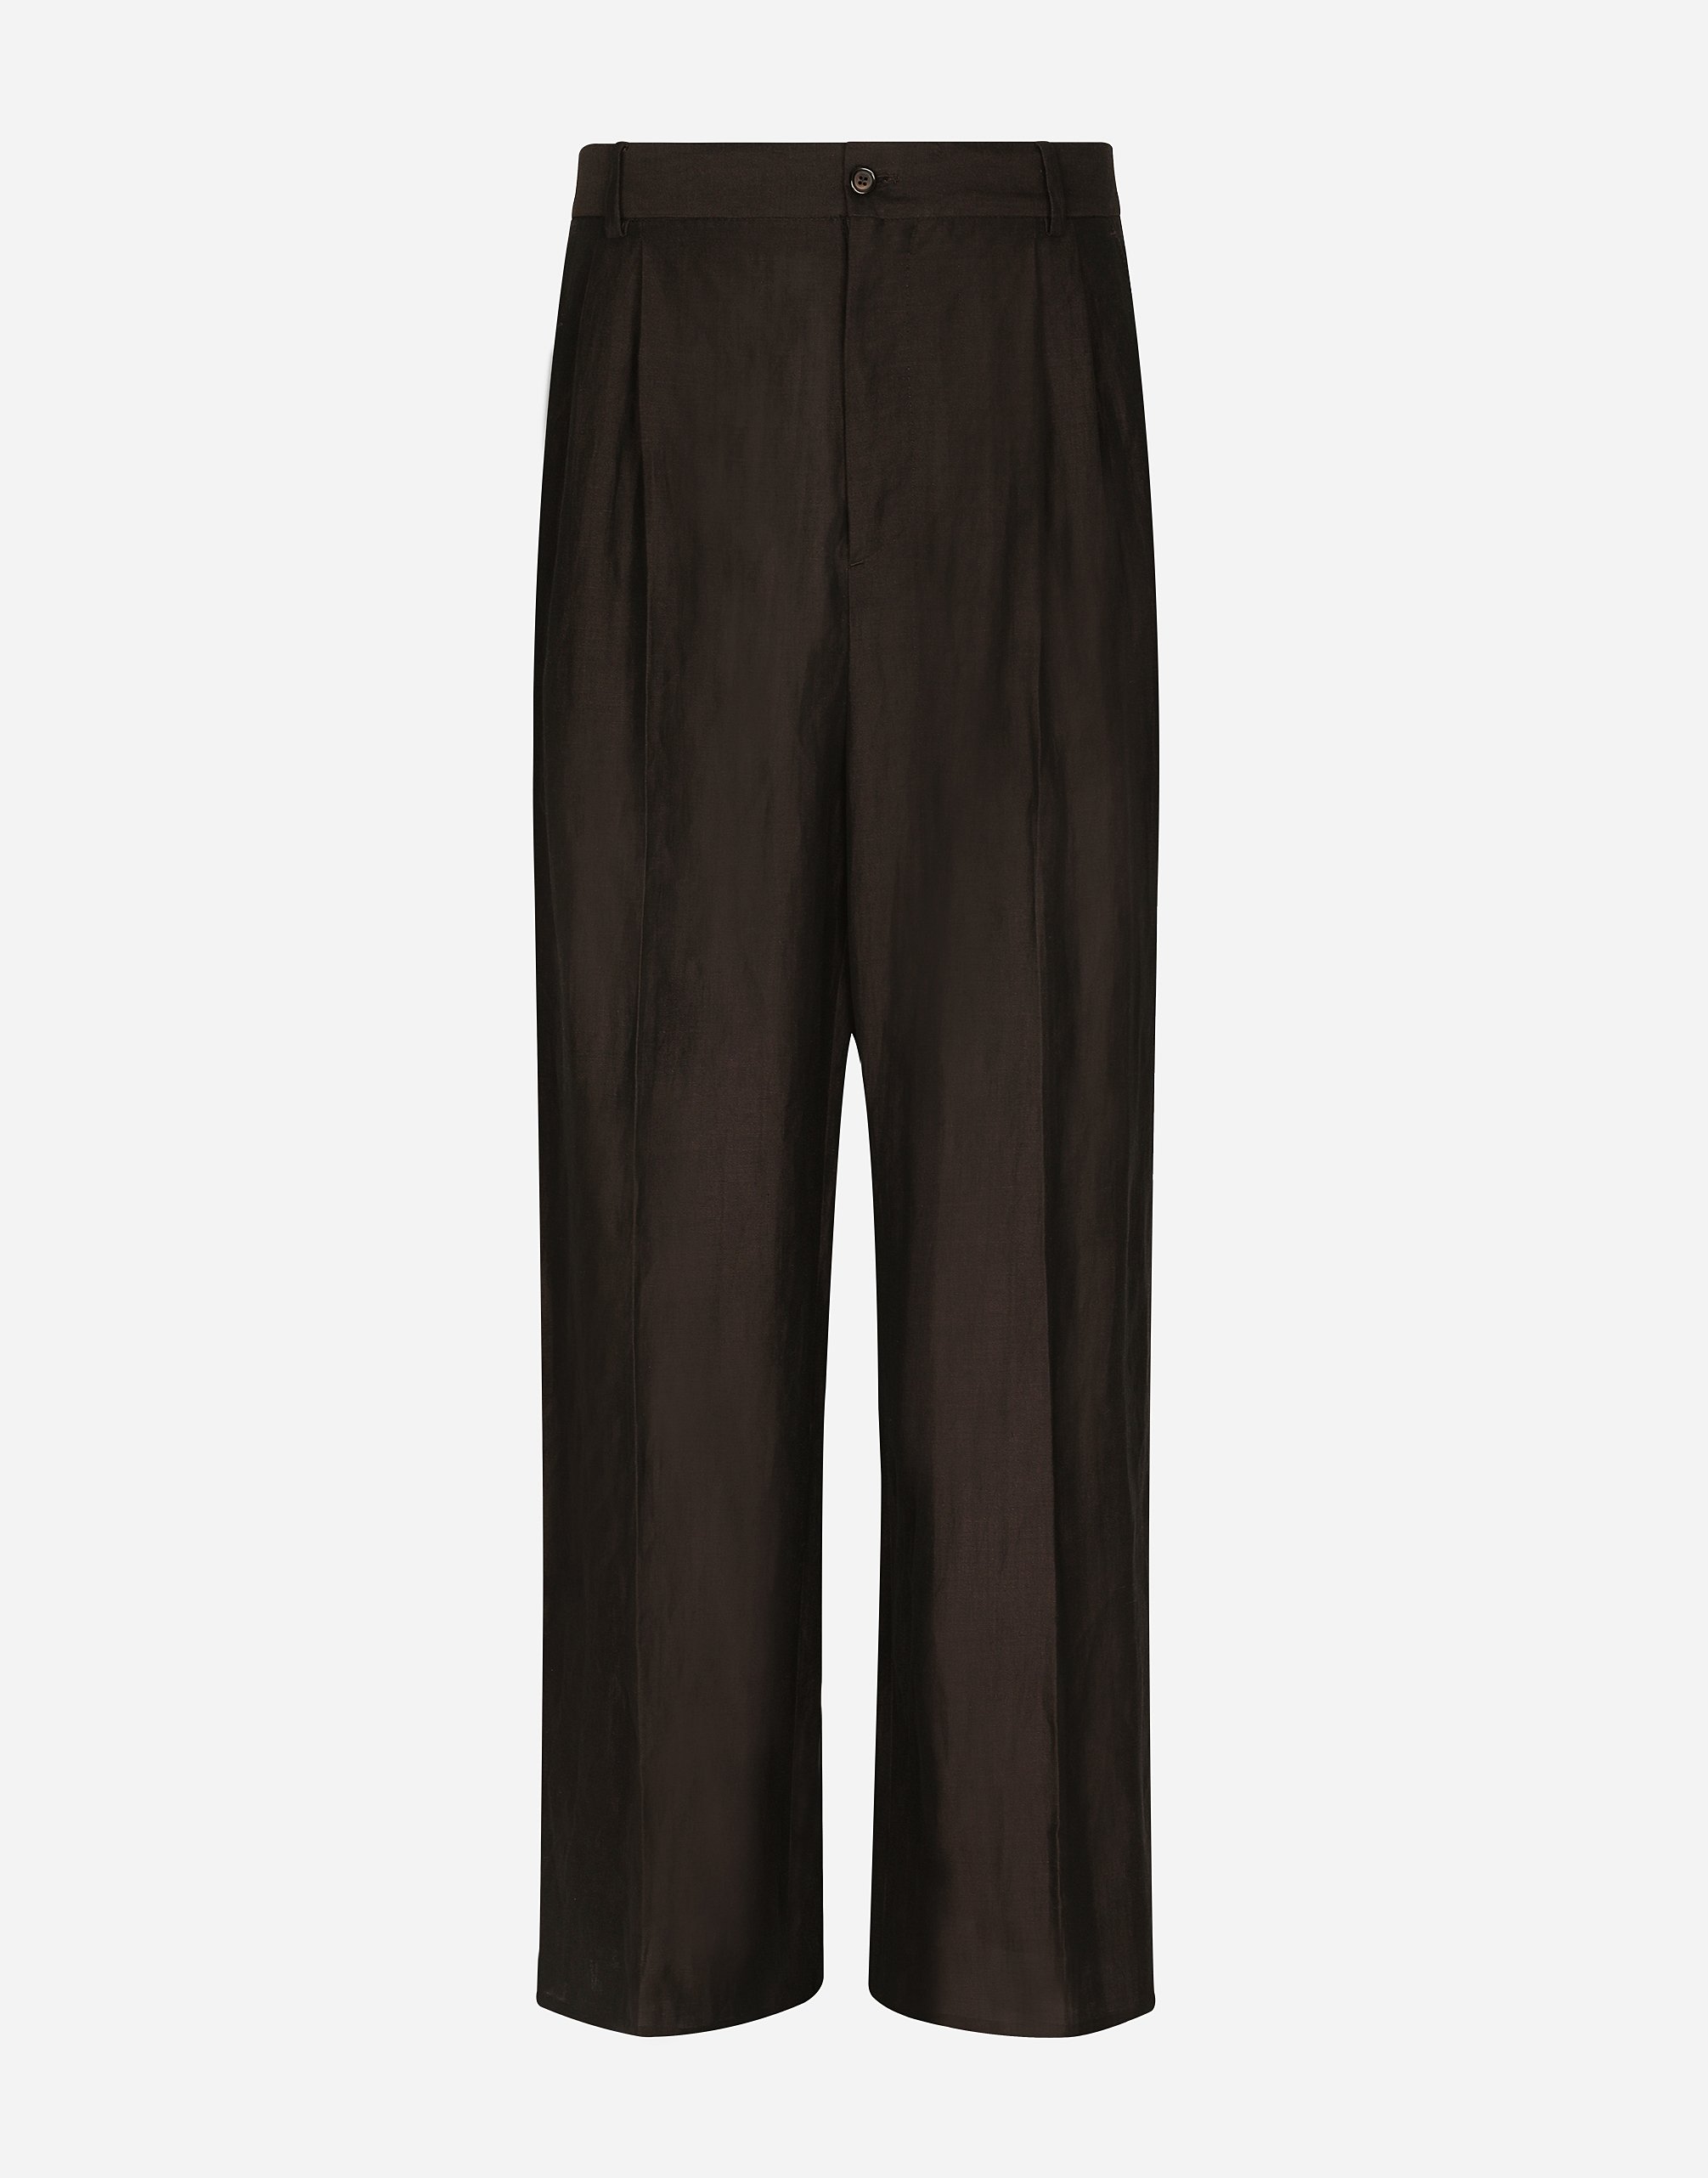 Dolce & Gabbana Tailored Viscose And Linen Trousers In Brown